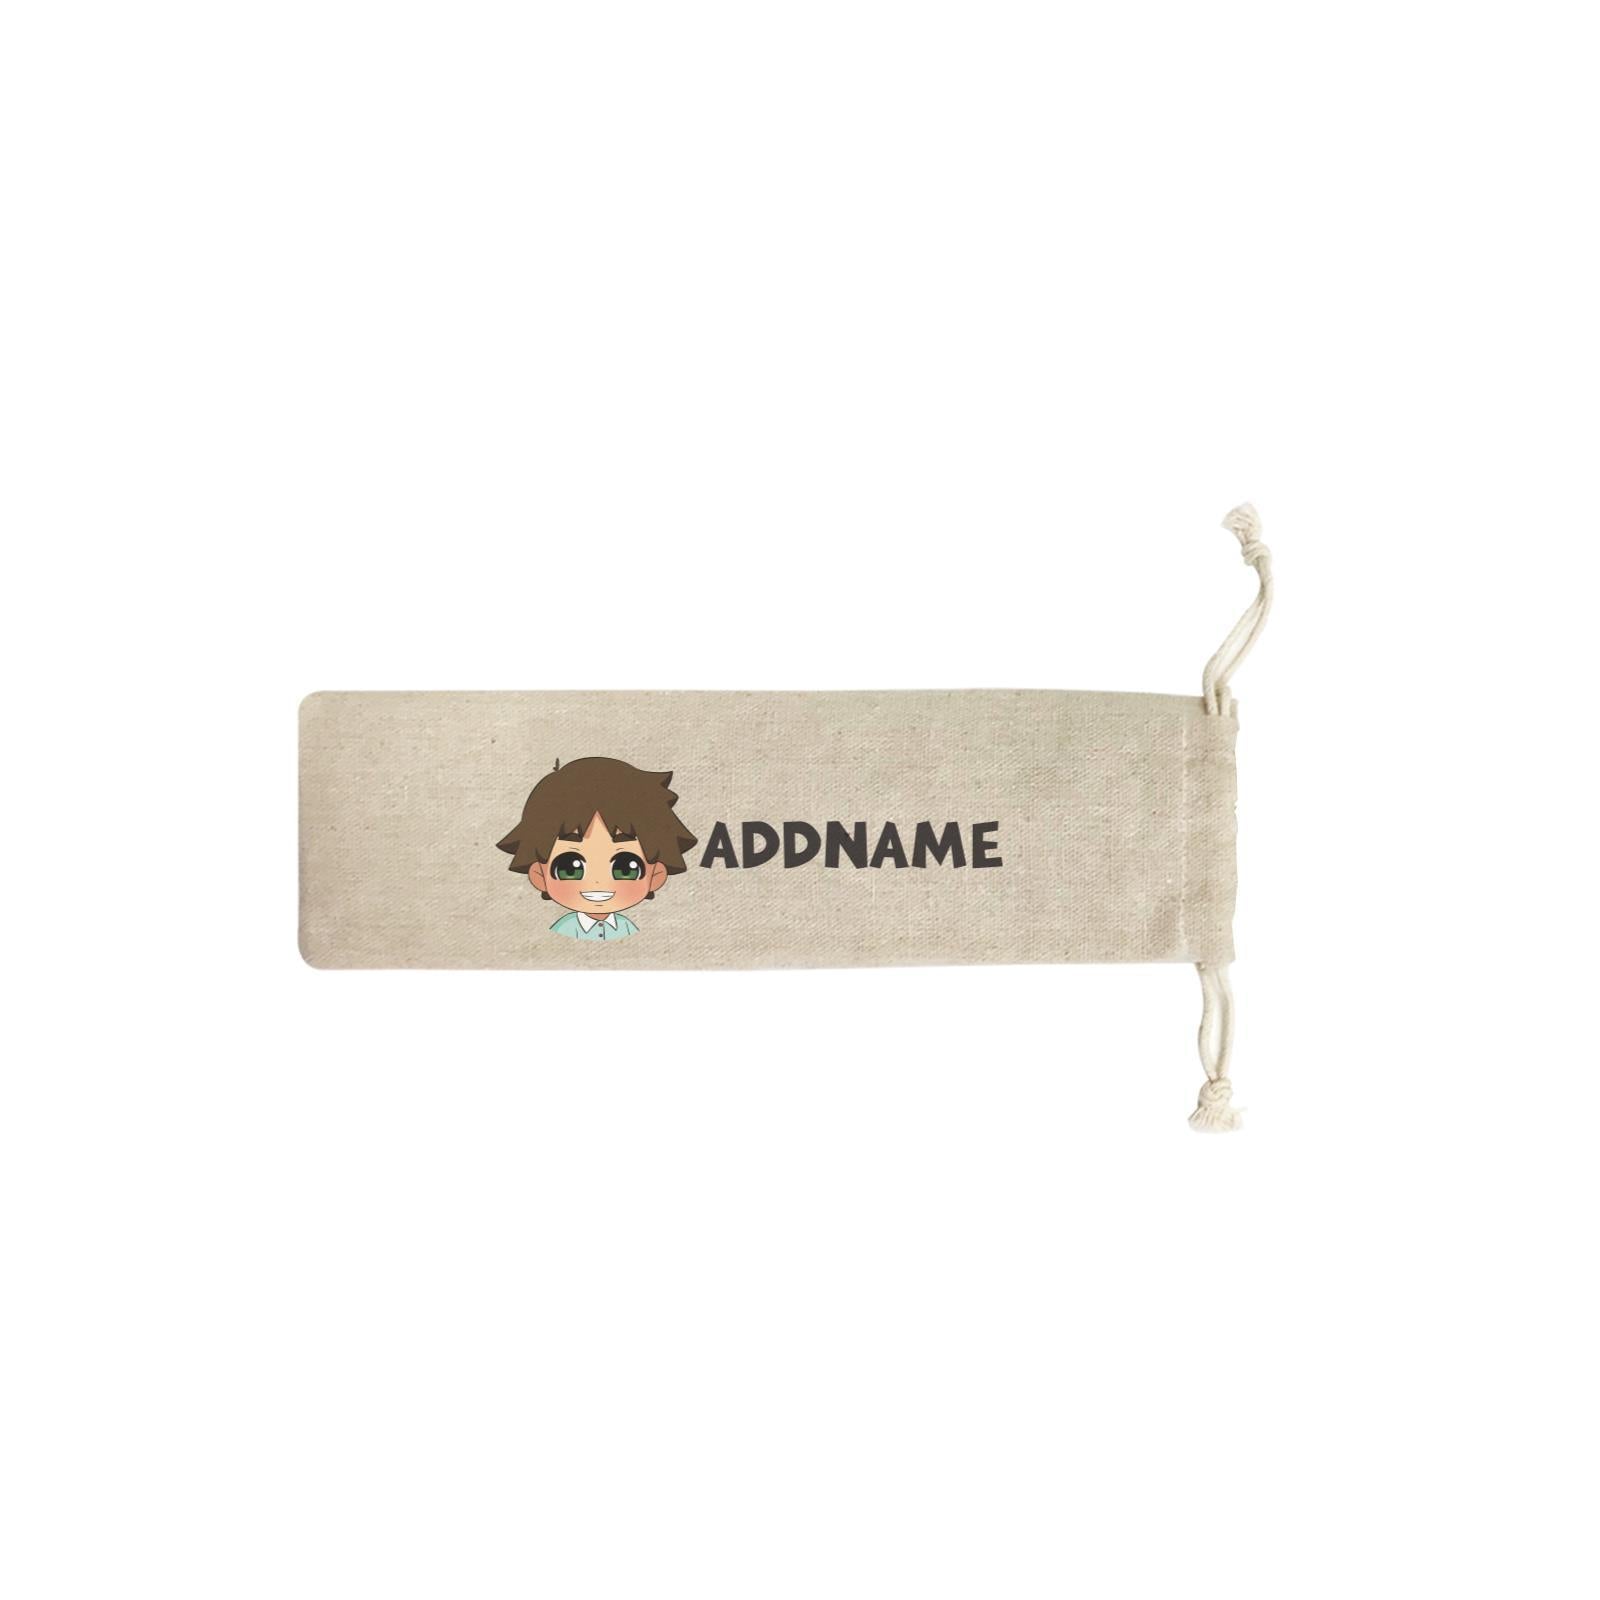 Children's Day Gift Series Little Boy Addname SB Straw Pouch (No Straws included)